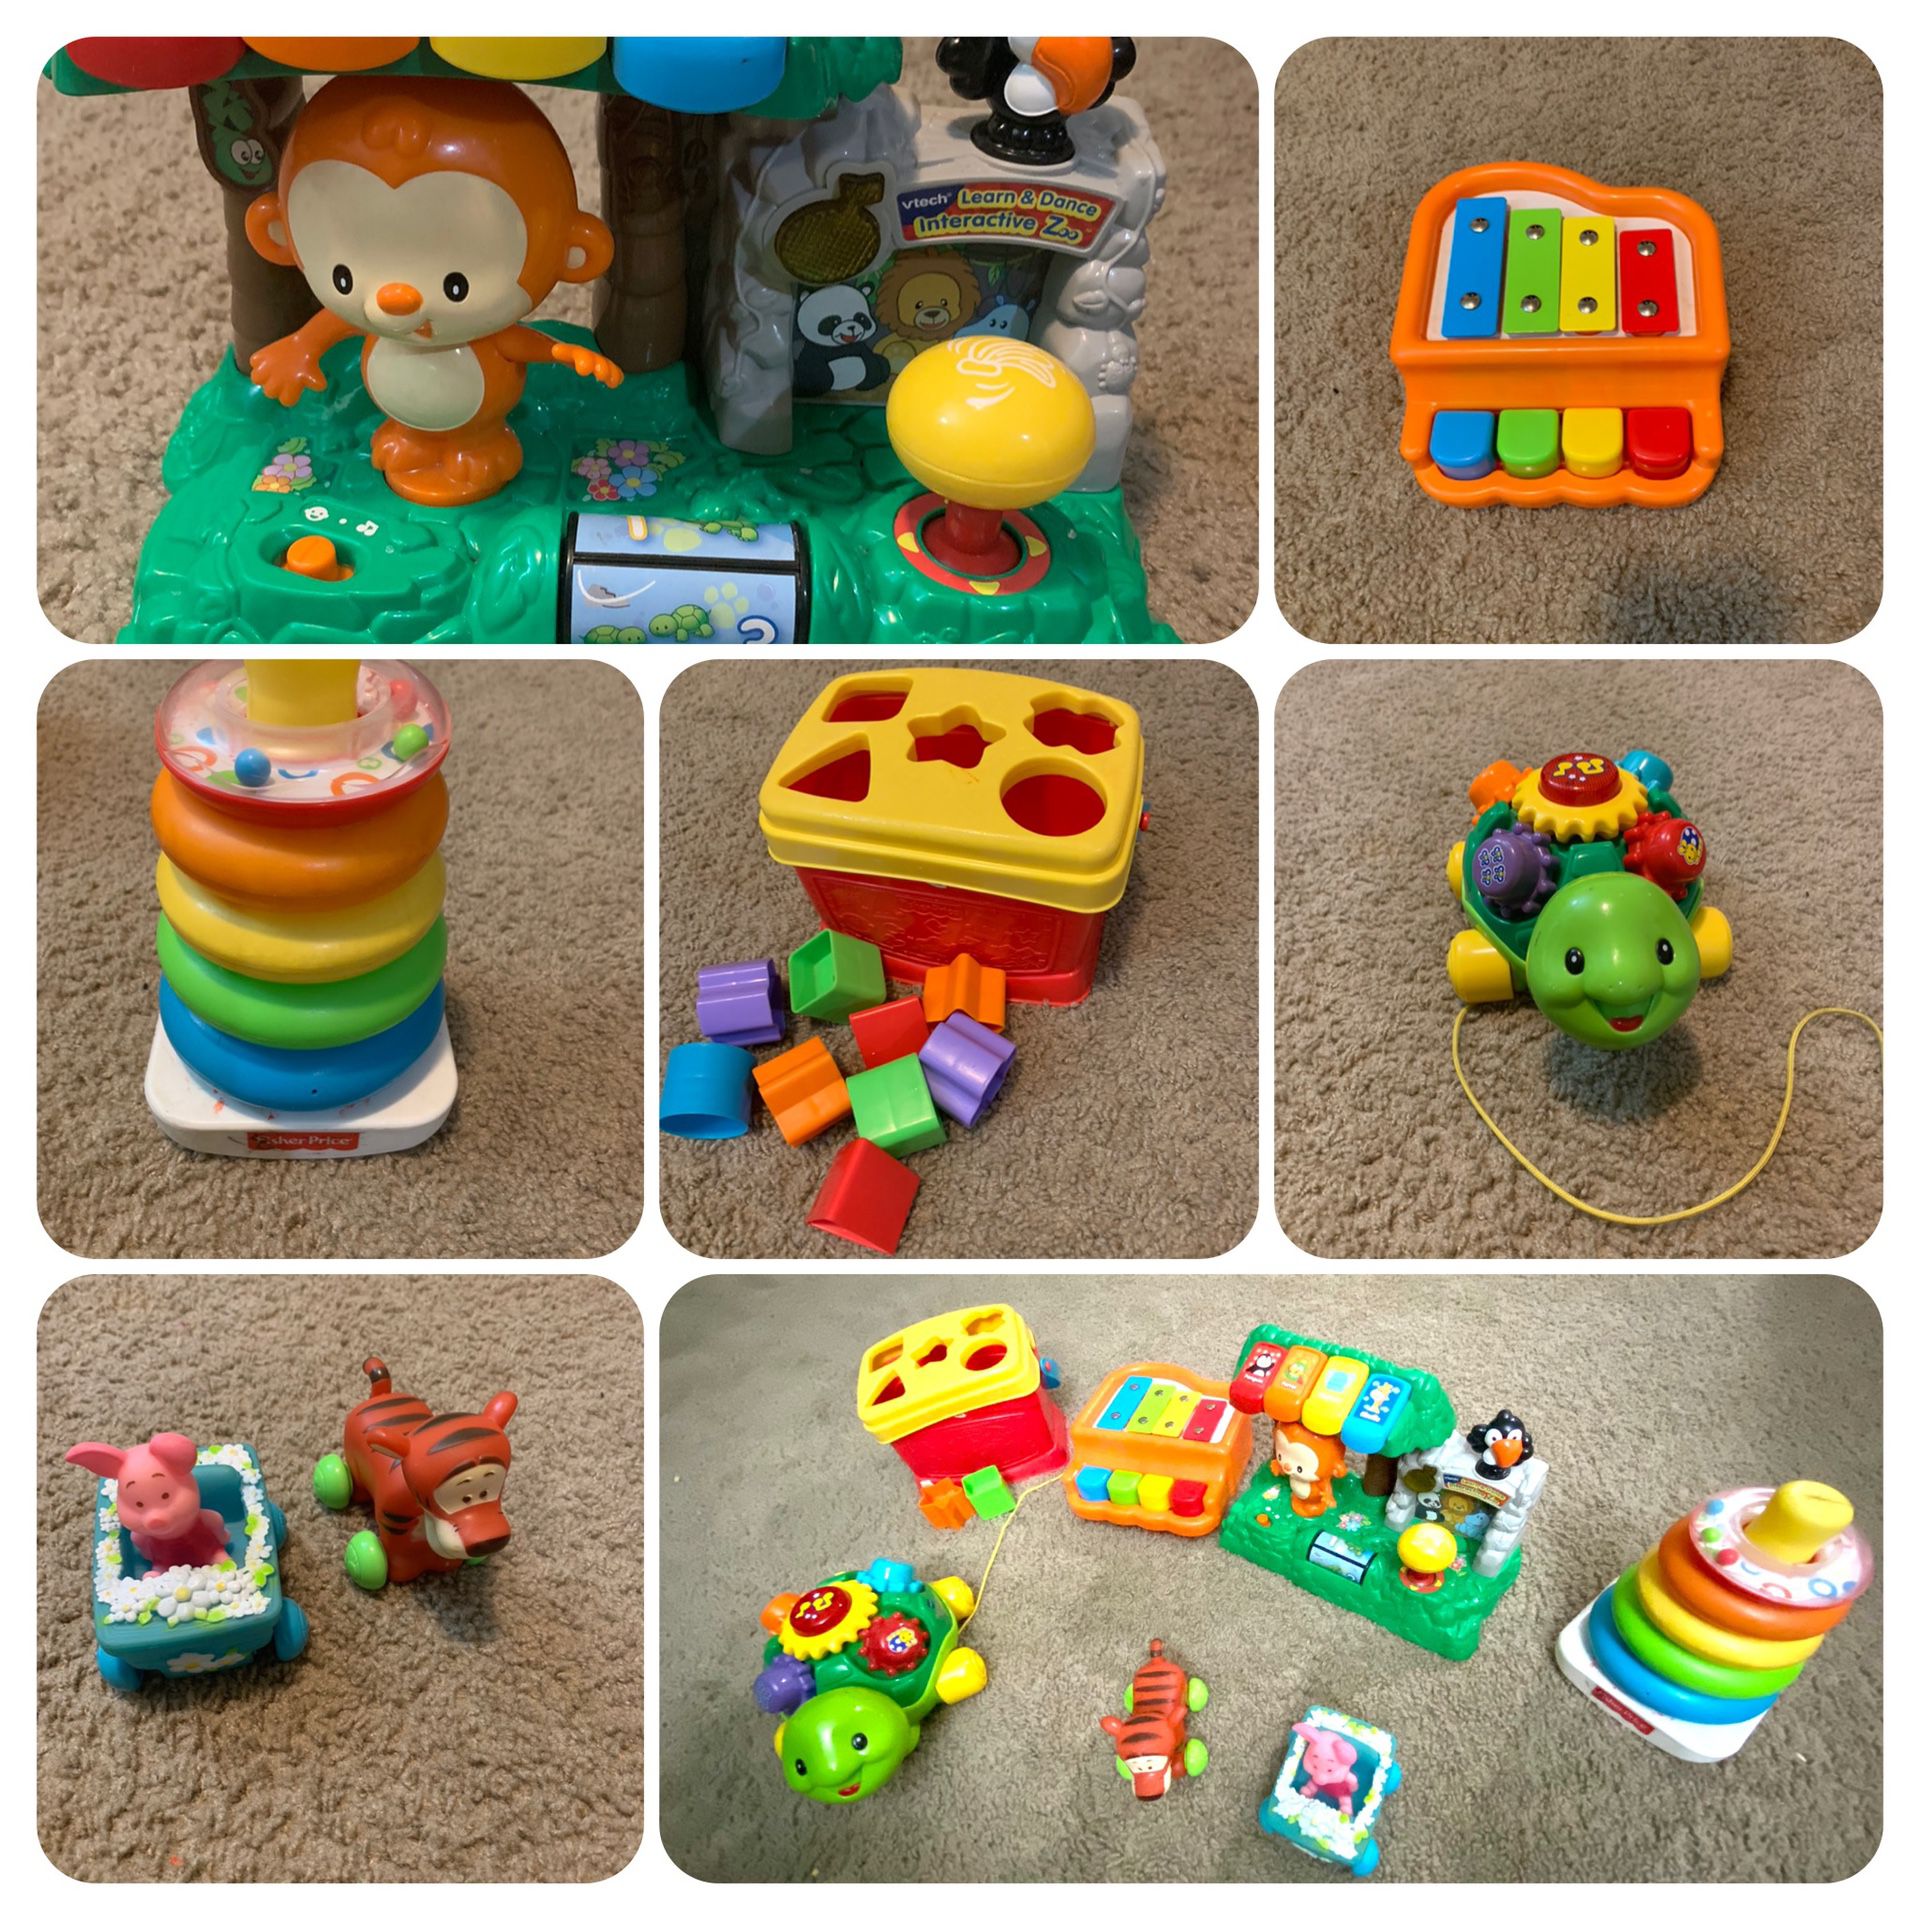 Kids / baby Toys in excellent condition